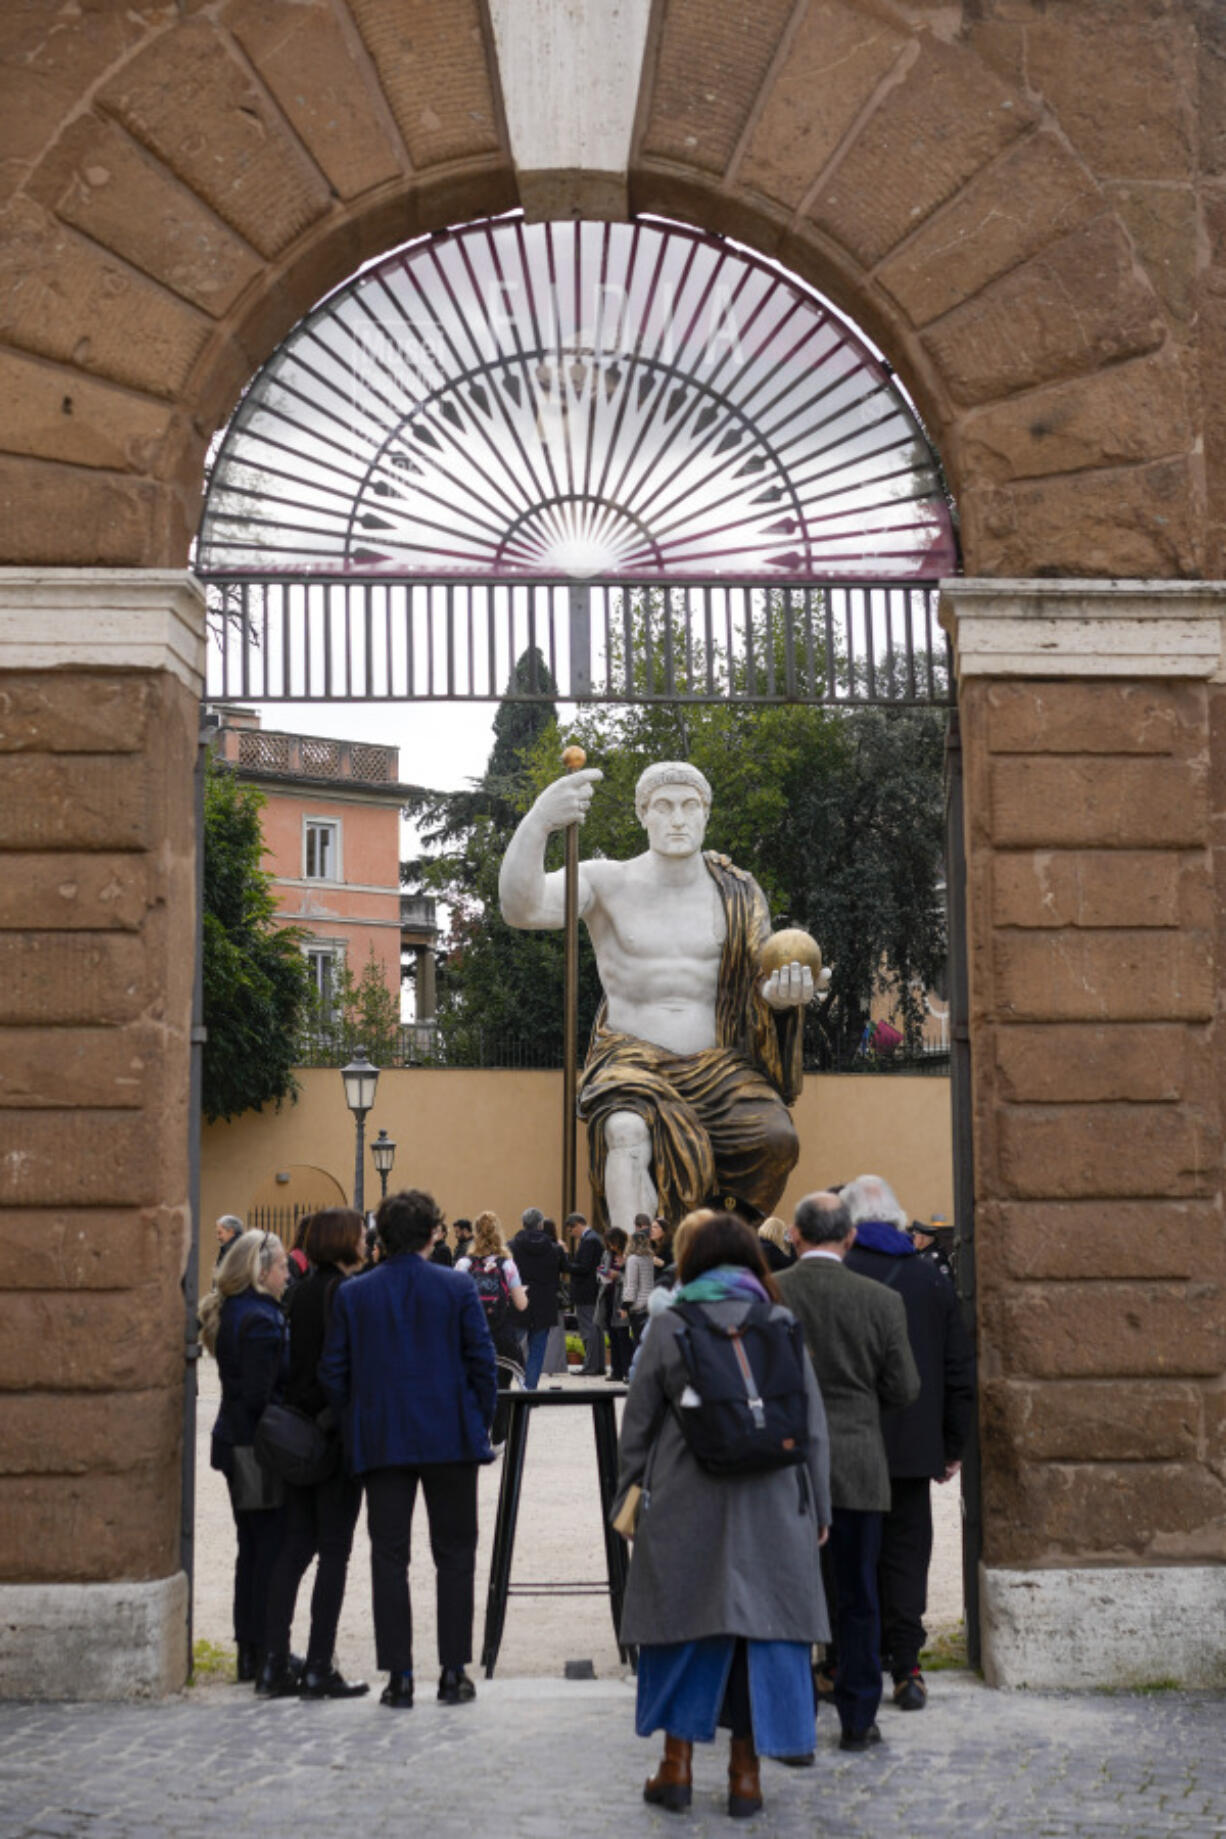 Visitors admire a massive replica of the statue Roman Emperor Constantine commissioned for himself after 312 AD that was built using 3D technology from scans of the nine giant original marble body parts that remain, as it was unveiled Tuesday in Rome.